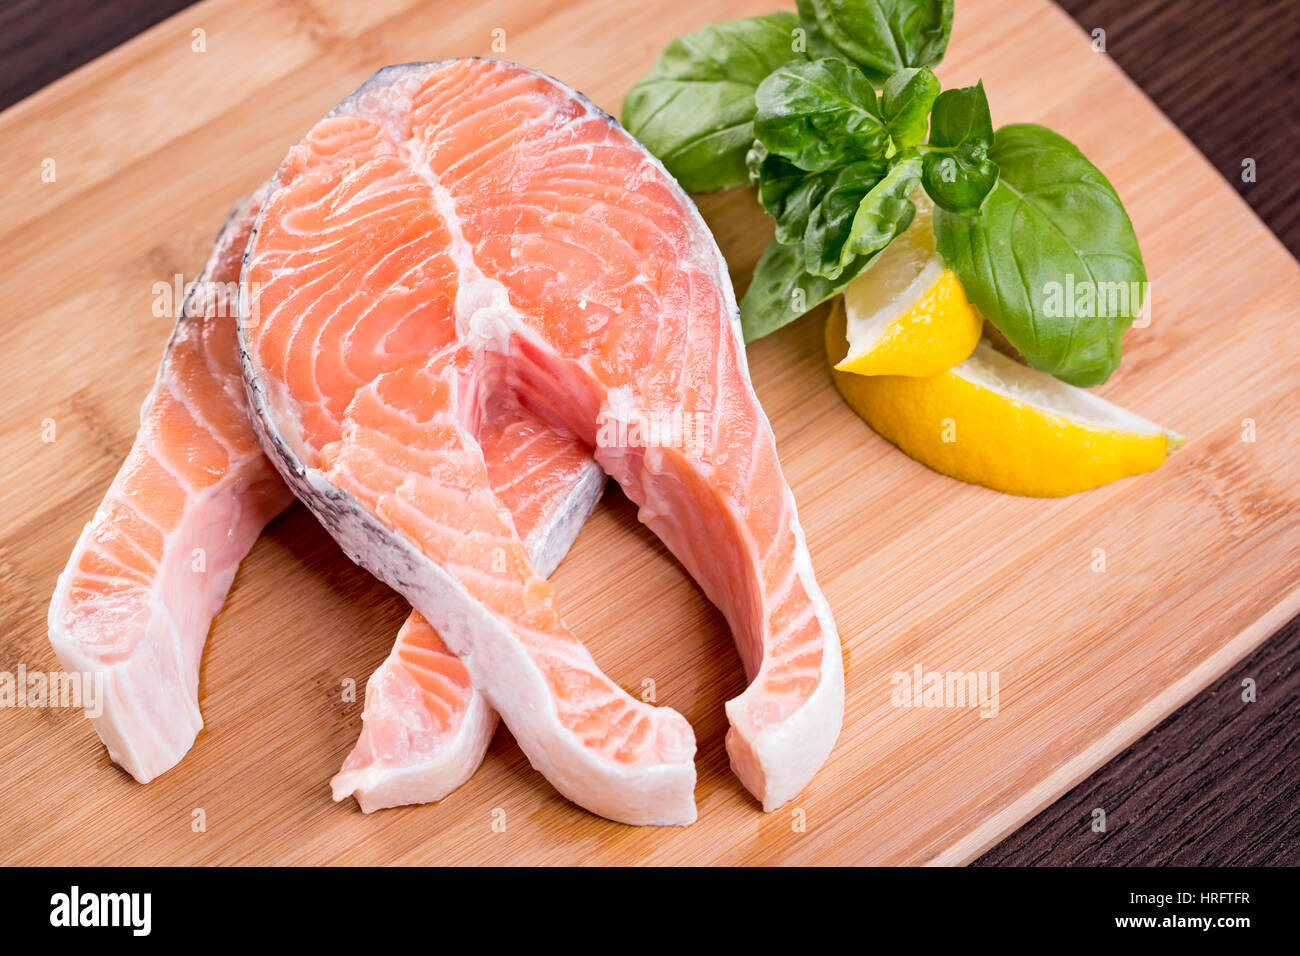 Raw fish fillet with lemon and basil on wooden cutting board Stock Photo -  Alamy